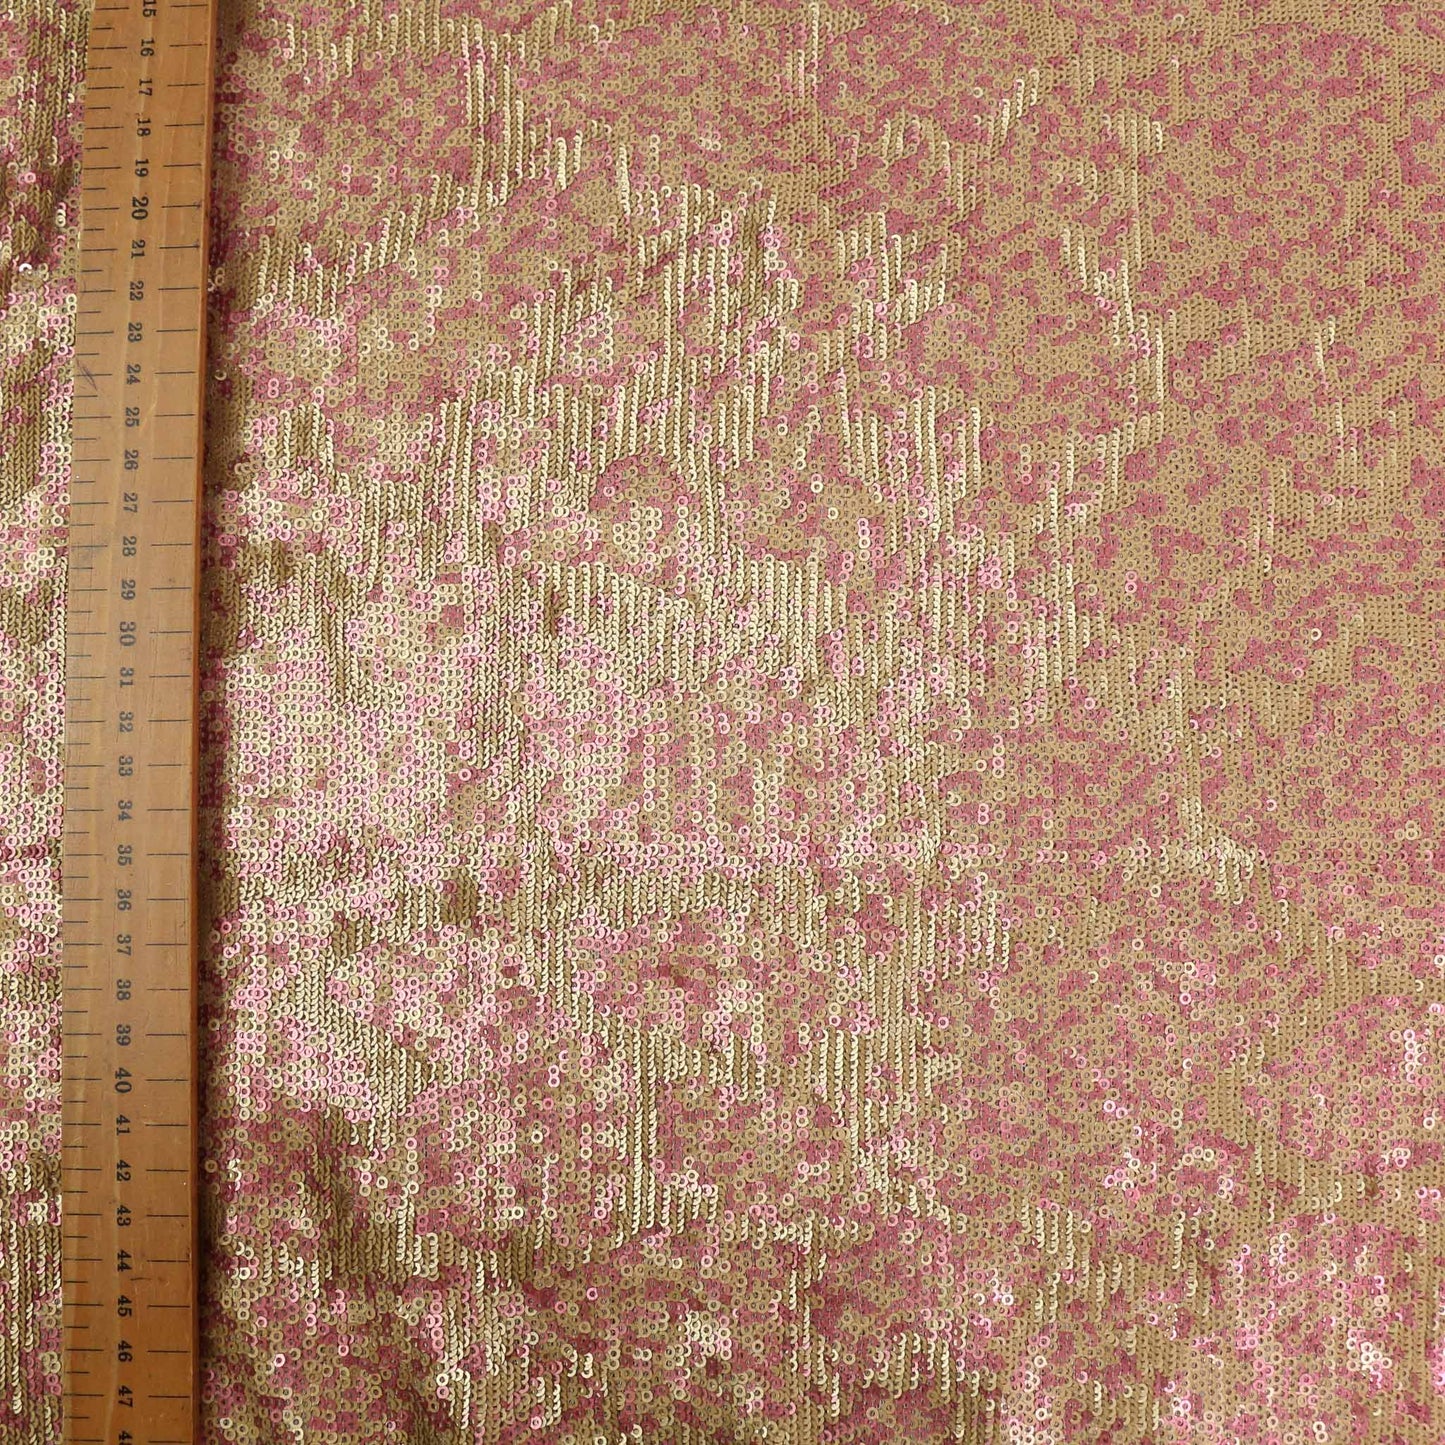 Sequin Fabric - Gold, Dusty Pink